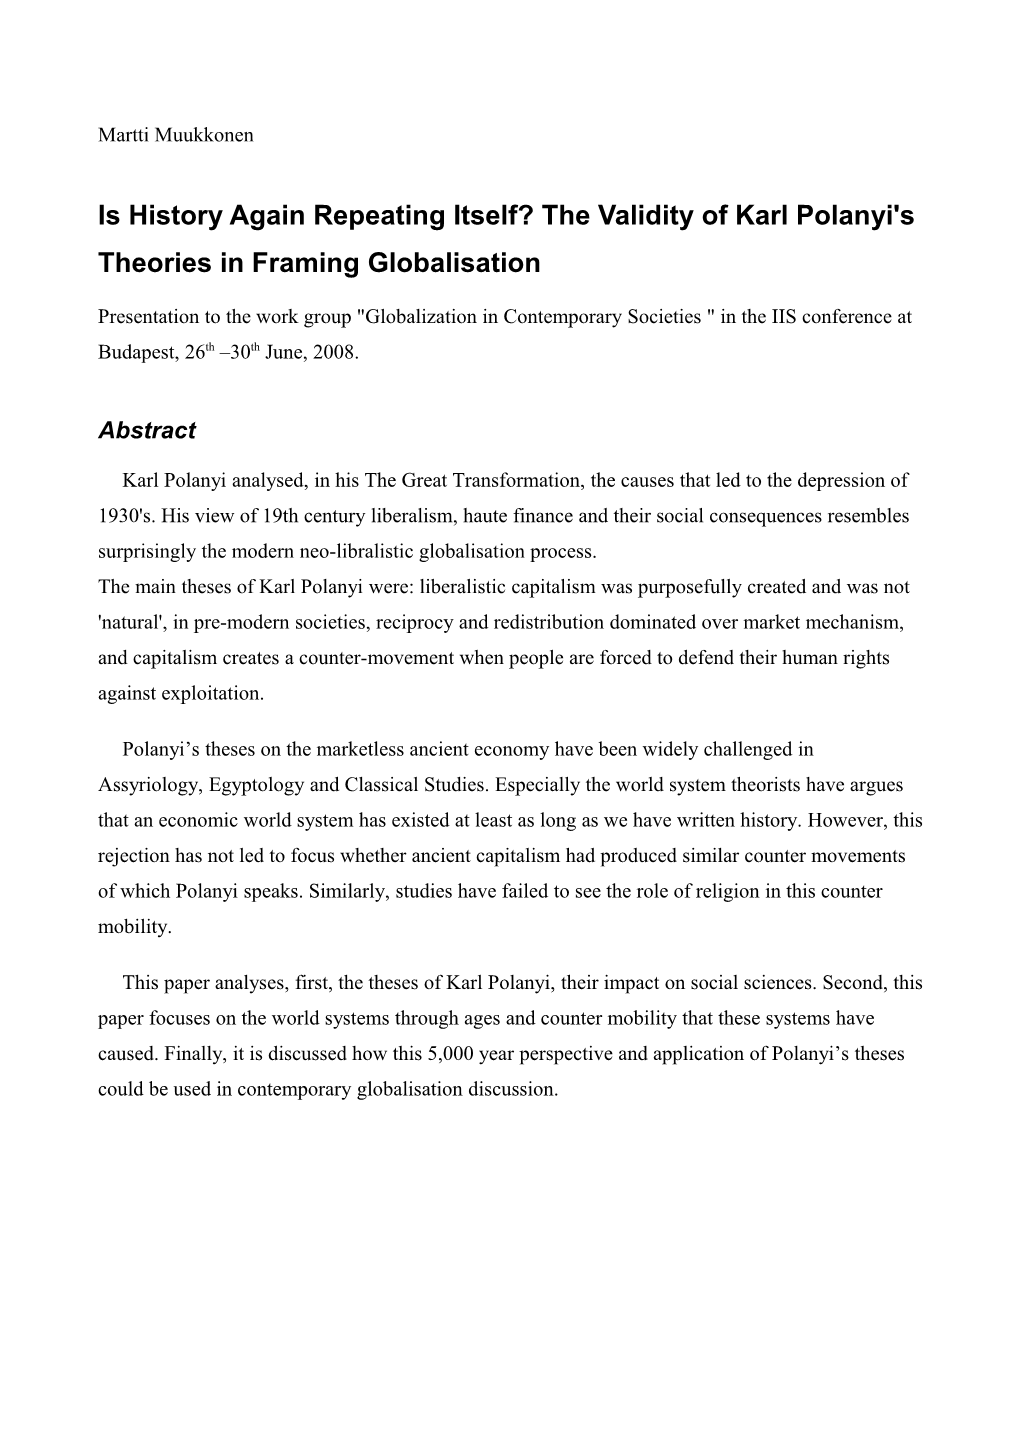 Is History Again Repeating Itself? the Validity of Karl Polanyi's Theories in Framing